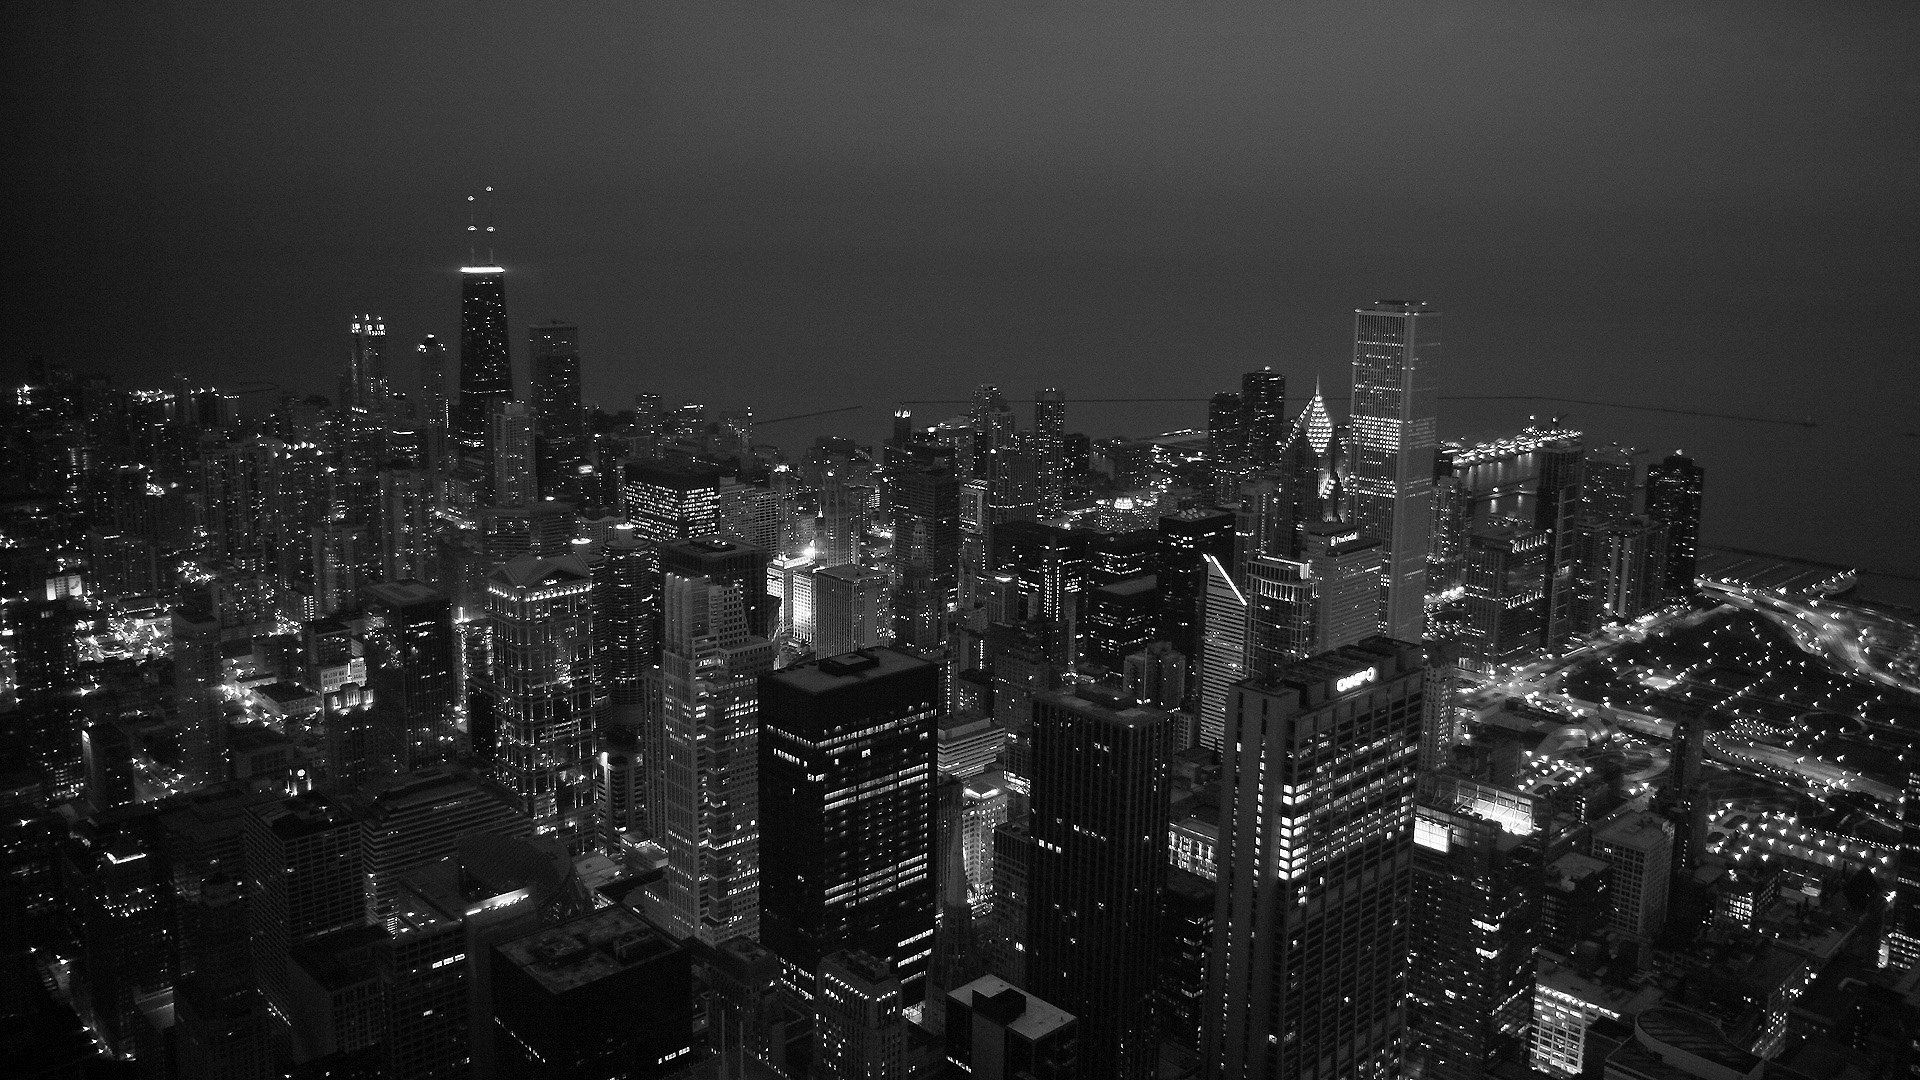 Black and white cityscape wallpaper 1920x1080 - High resolution